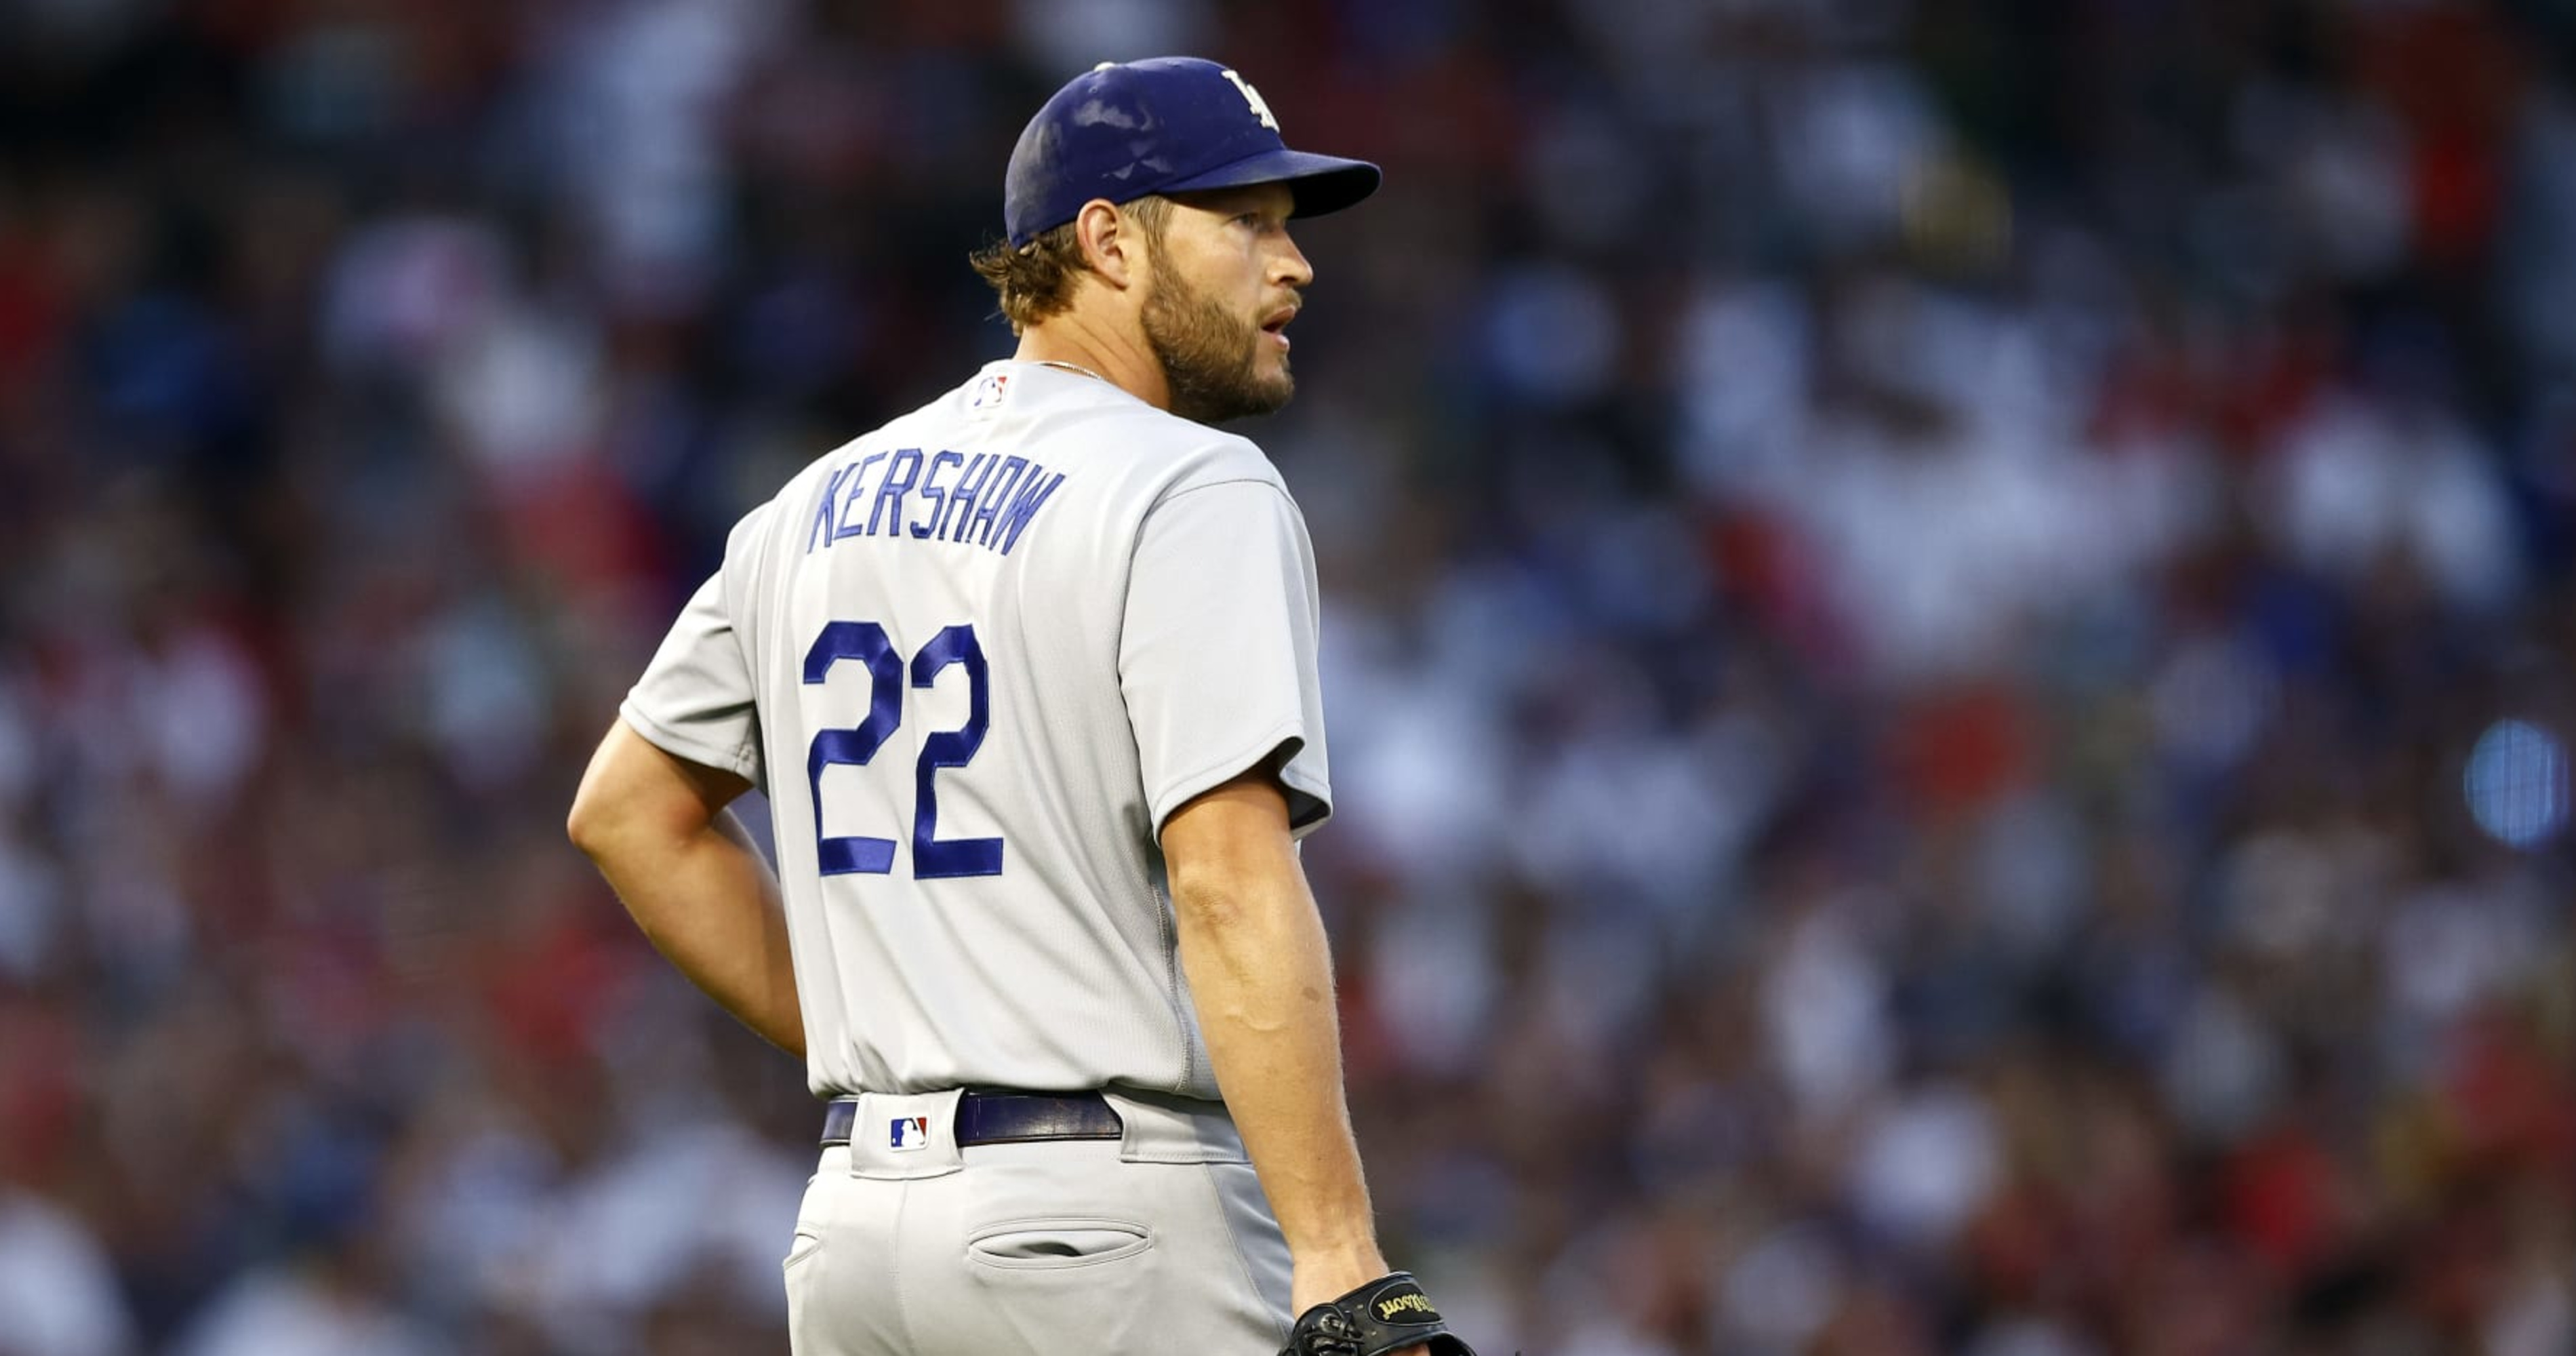 MLB All-Star Game 2022: Clayton Kershaw says first All-Star start 'means a  lot